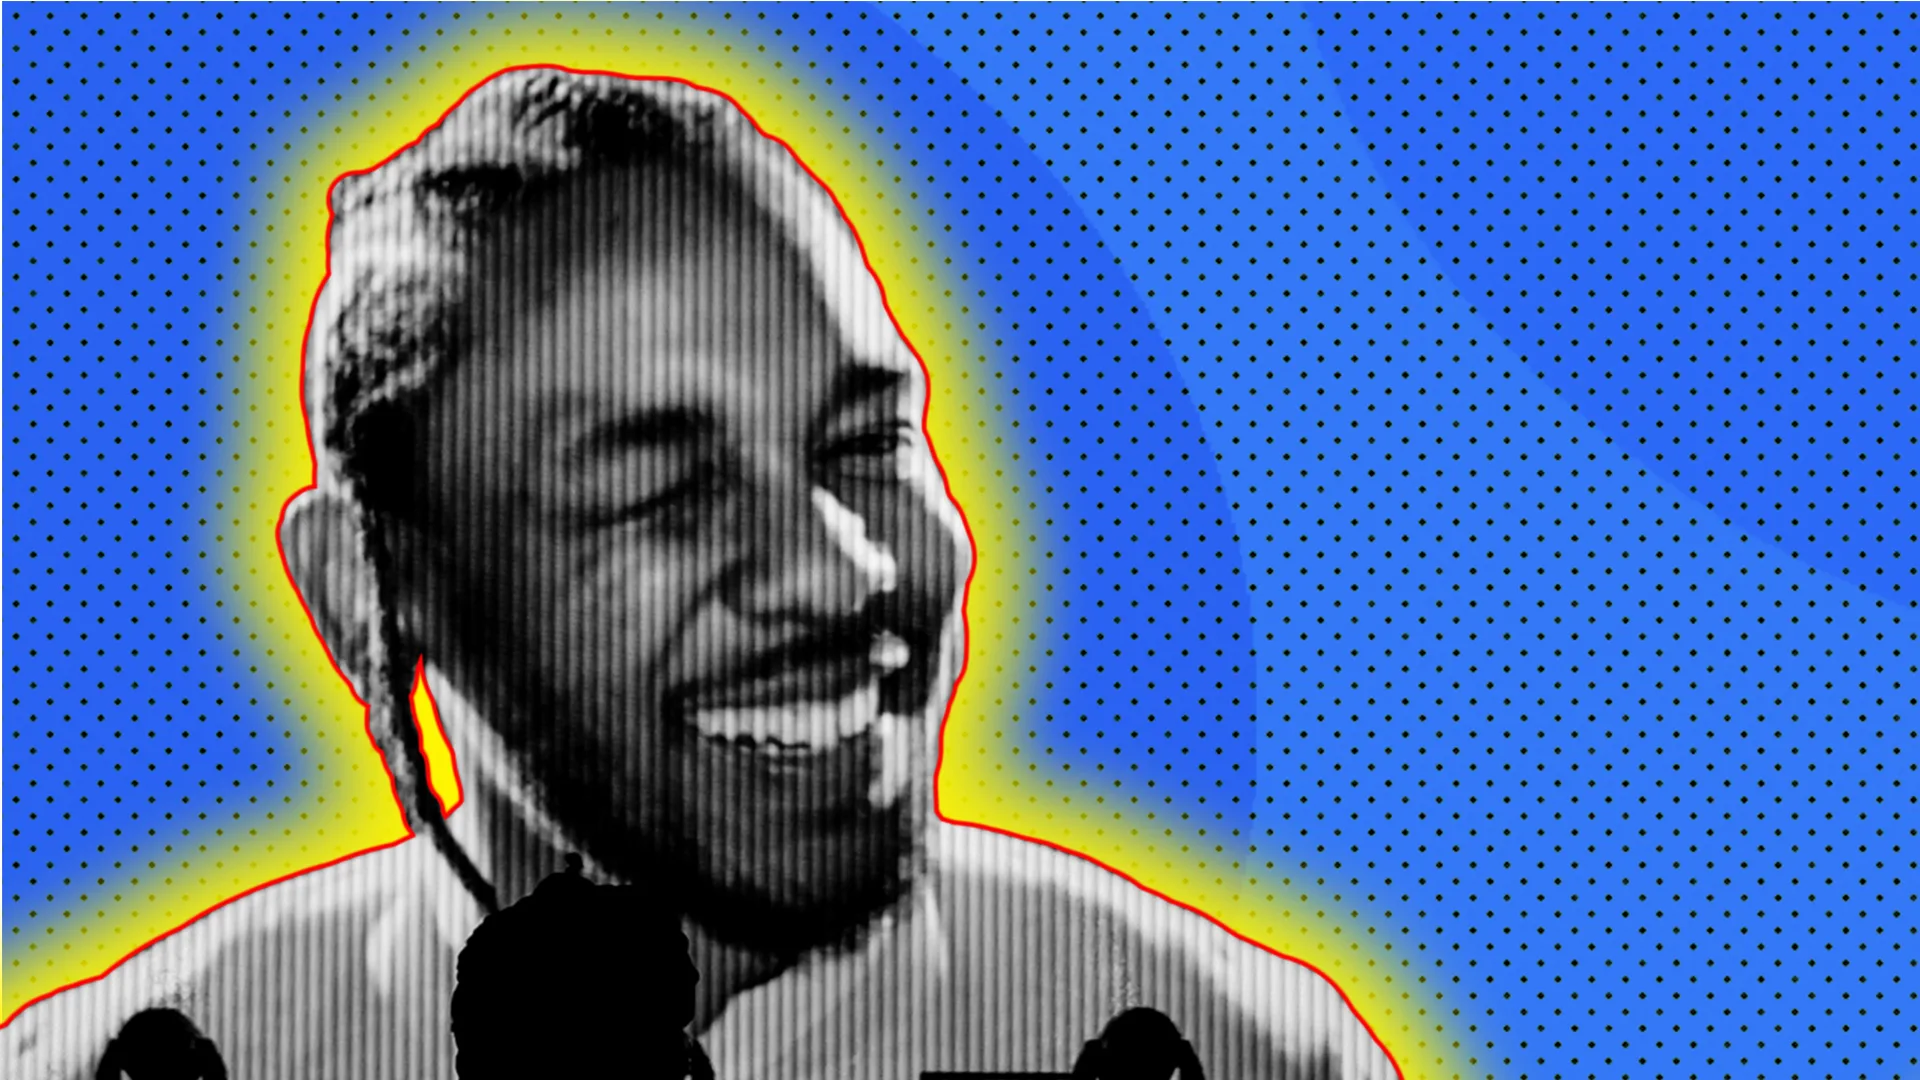 Kendrick Lamar on a big screen - in graphic house style